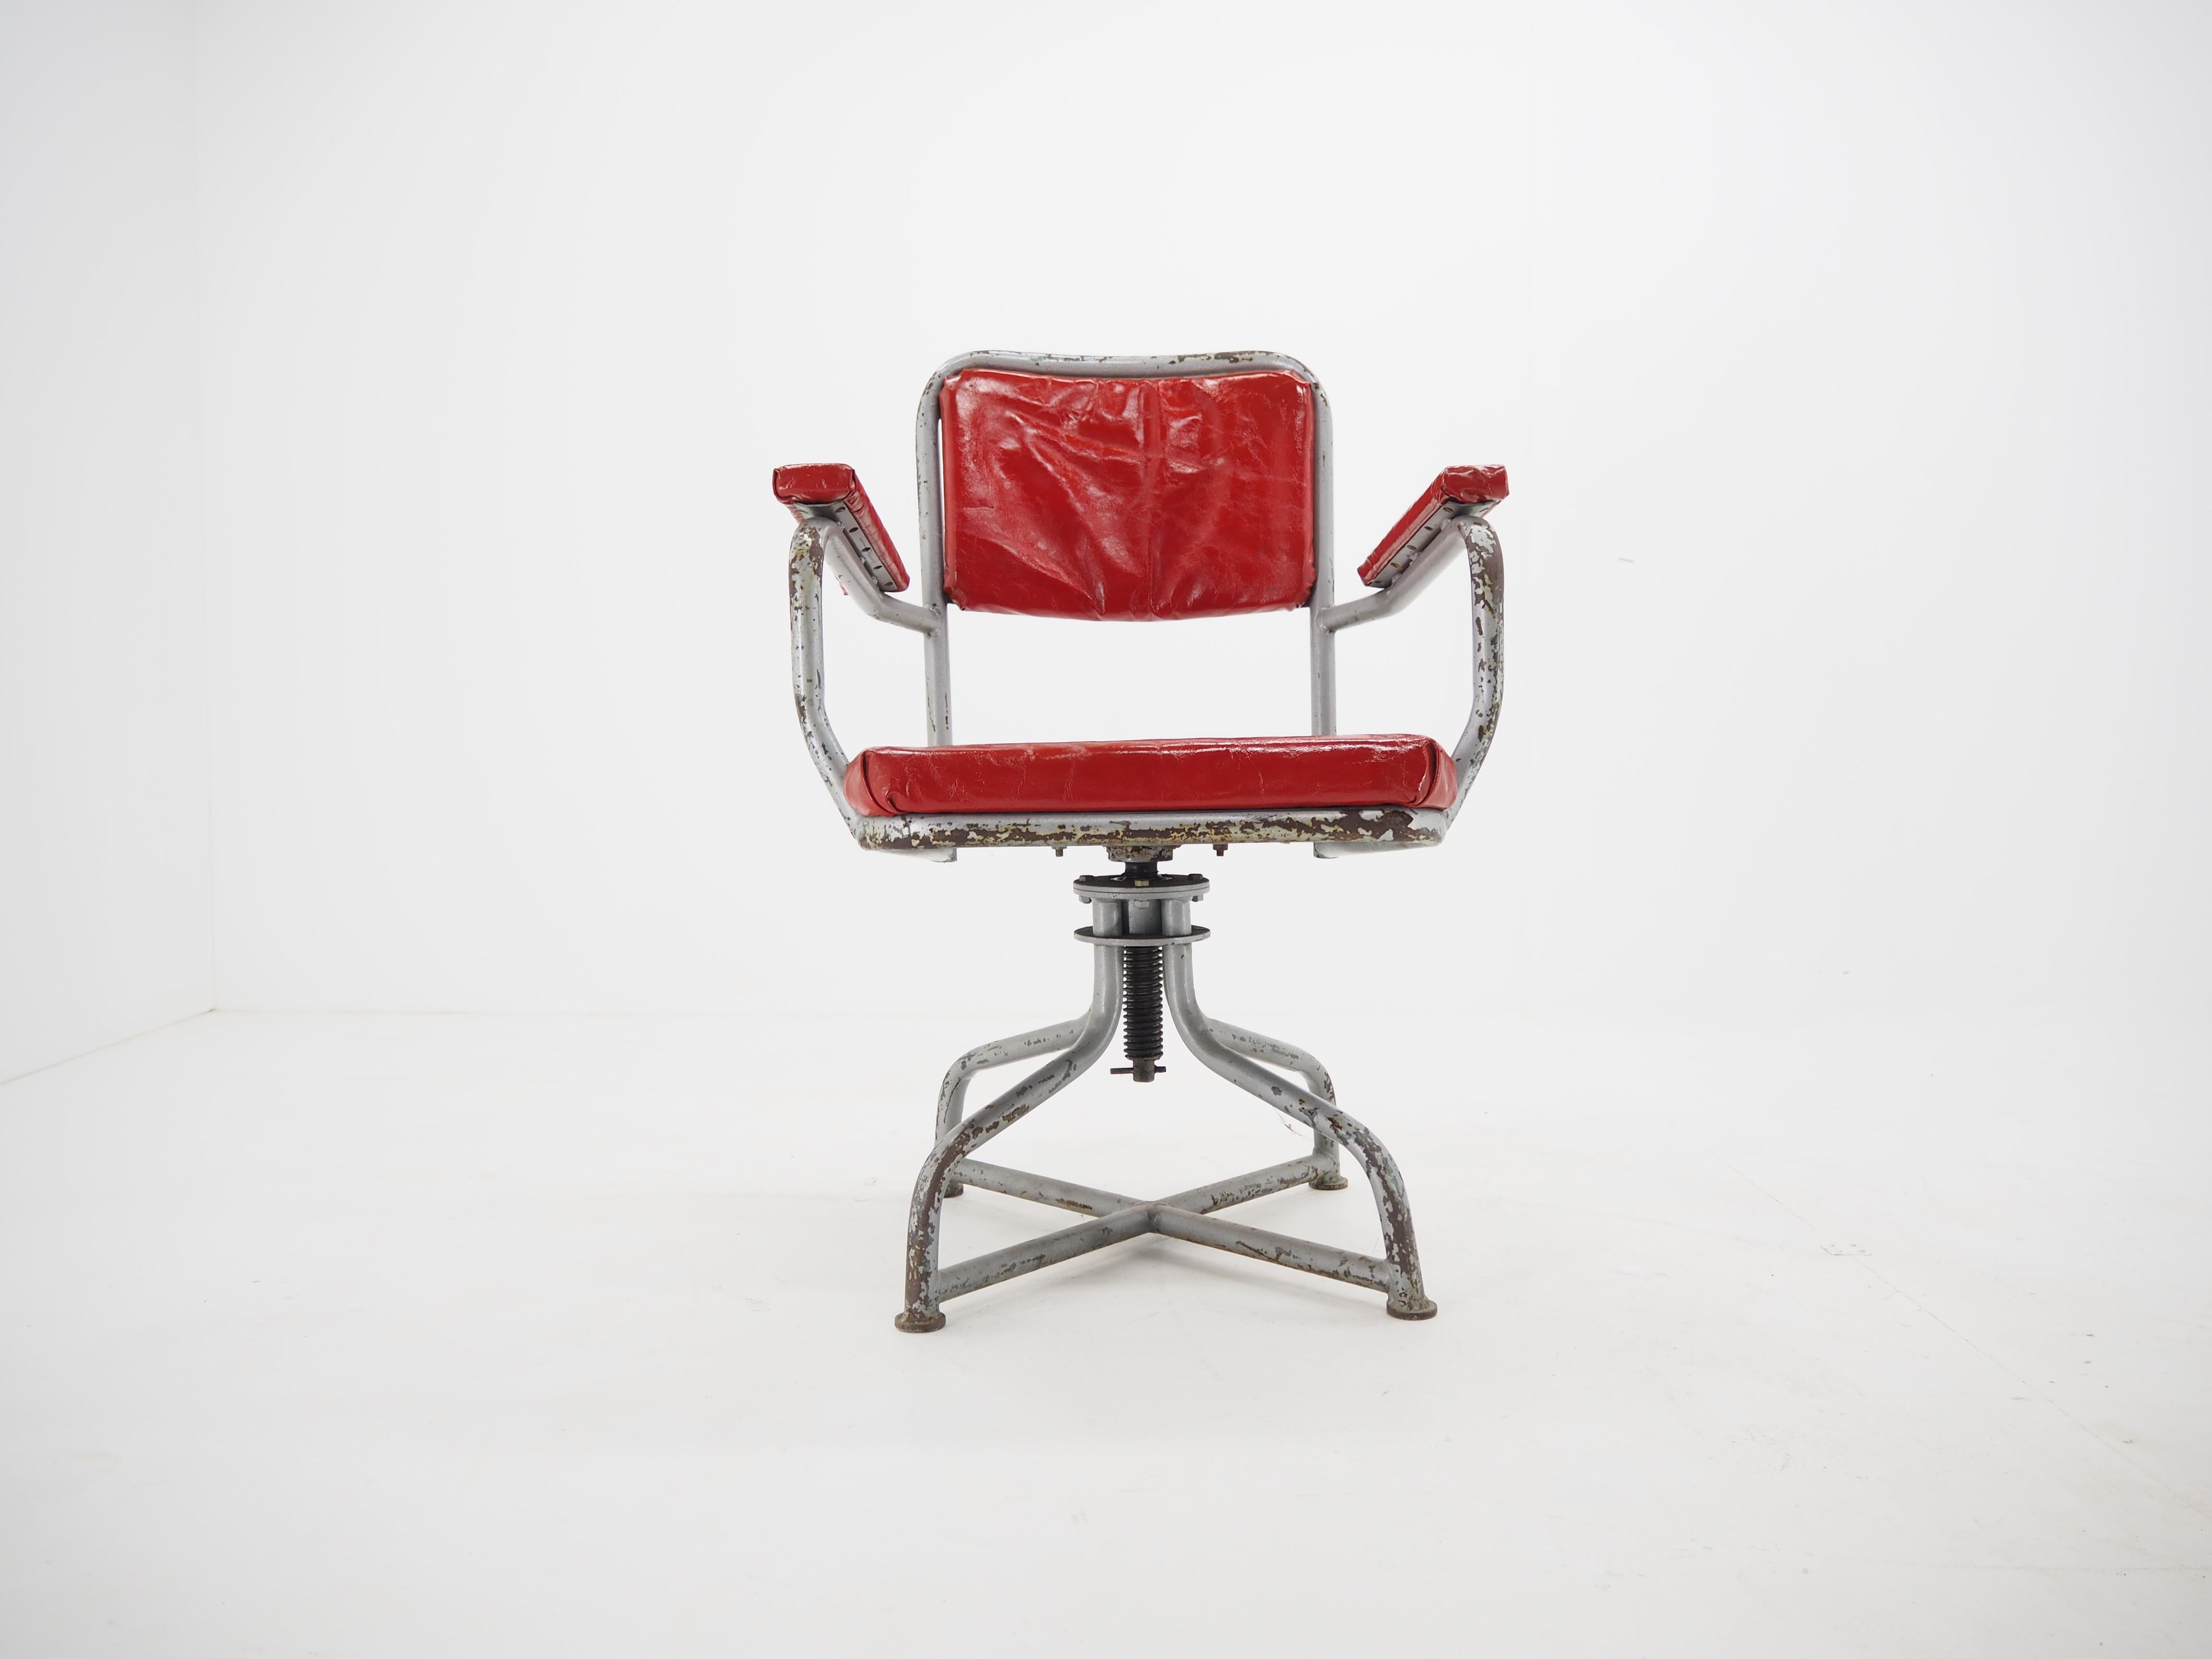 - From Cocpit
- In Original condition
- With a patina 
- Adjustable seat